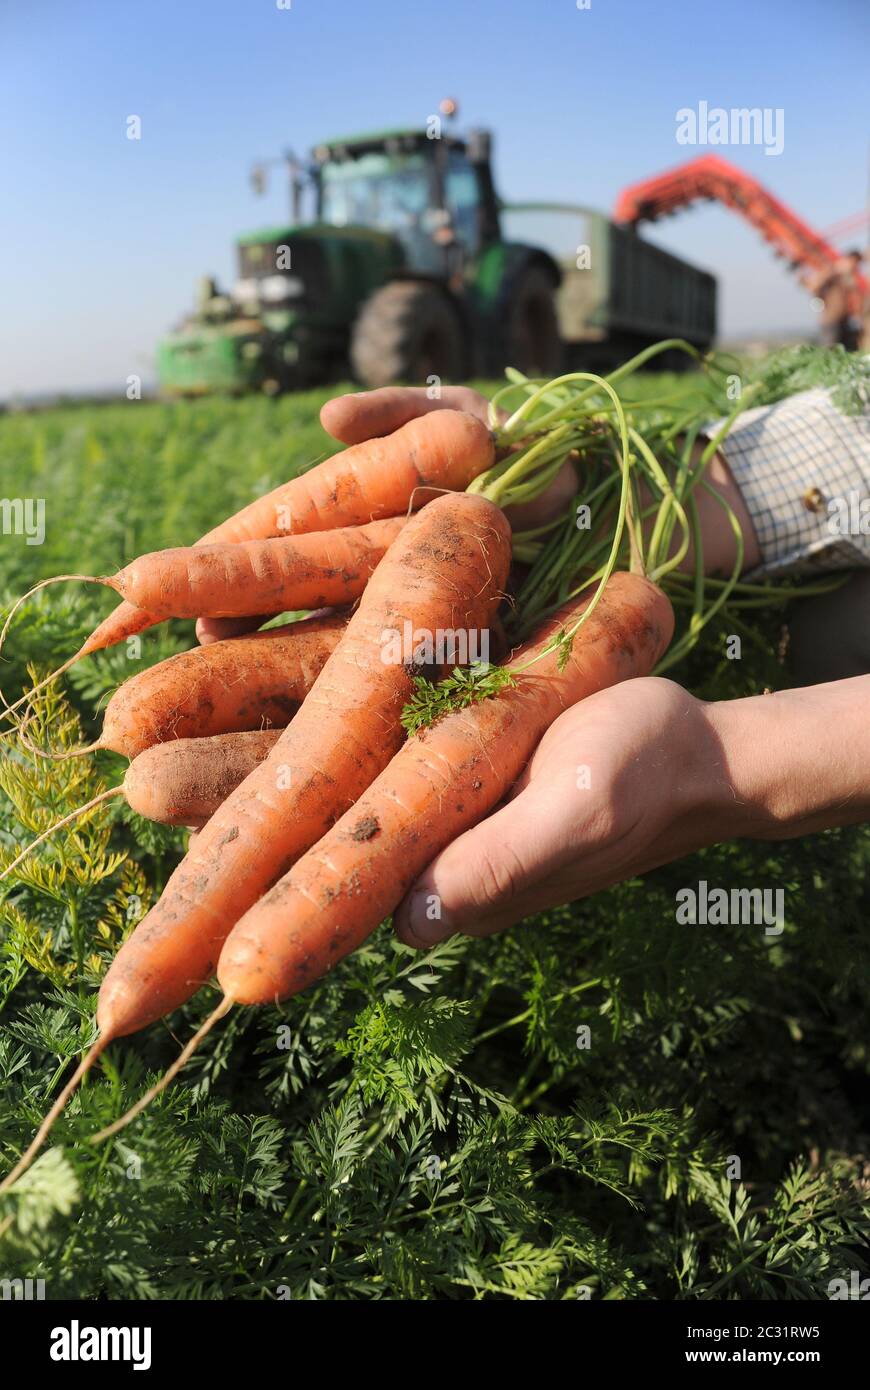 CARROTS BEING HARVESTED FROM FIELD RE BREXIT FARMING FOOD PRODUCTION ORGANIC TRADE DEALS FARMERS CROPS ETC UK Stock Photo